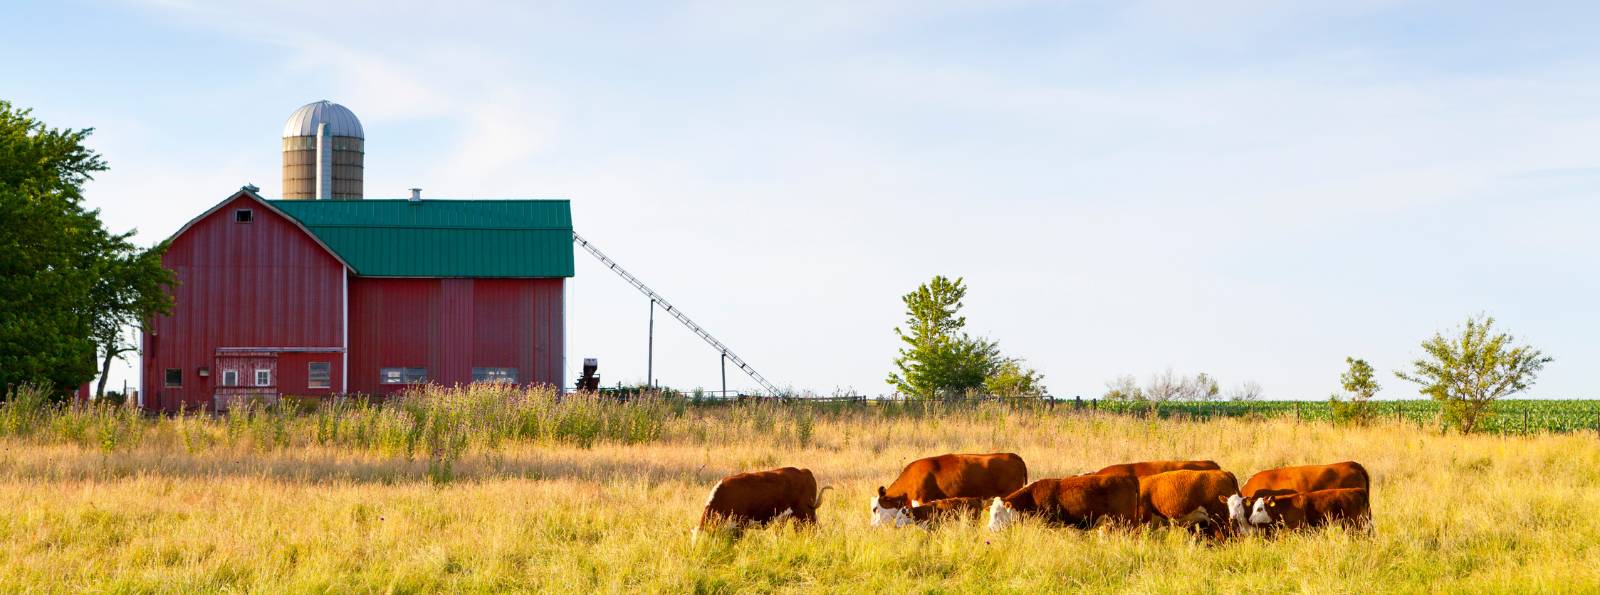 Hereford cattle standing in a filed in front of a red barn